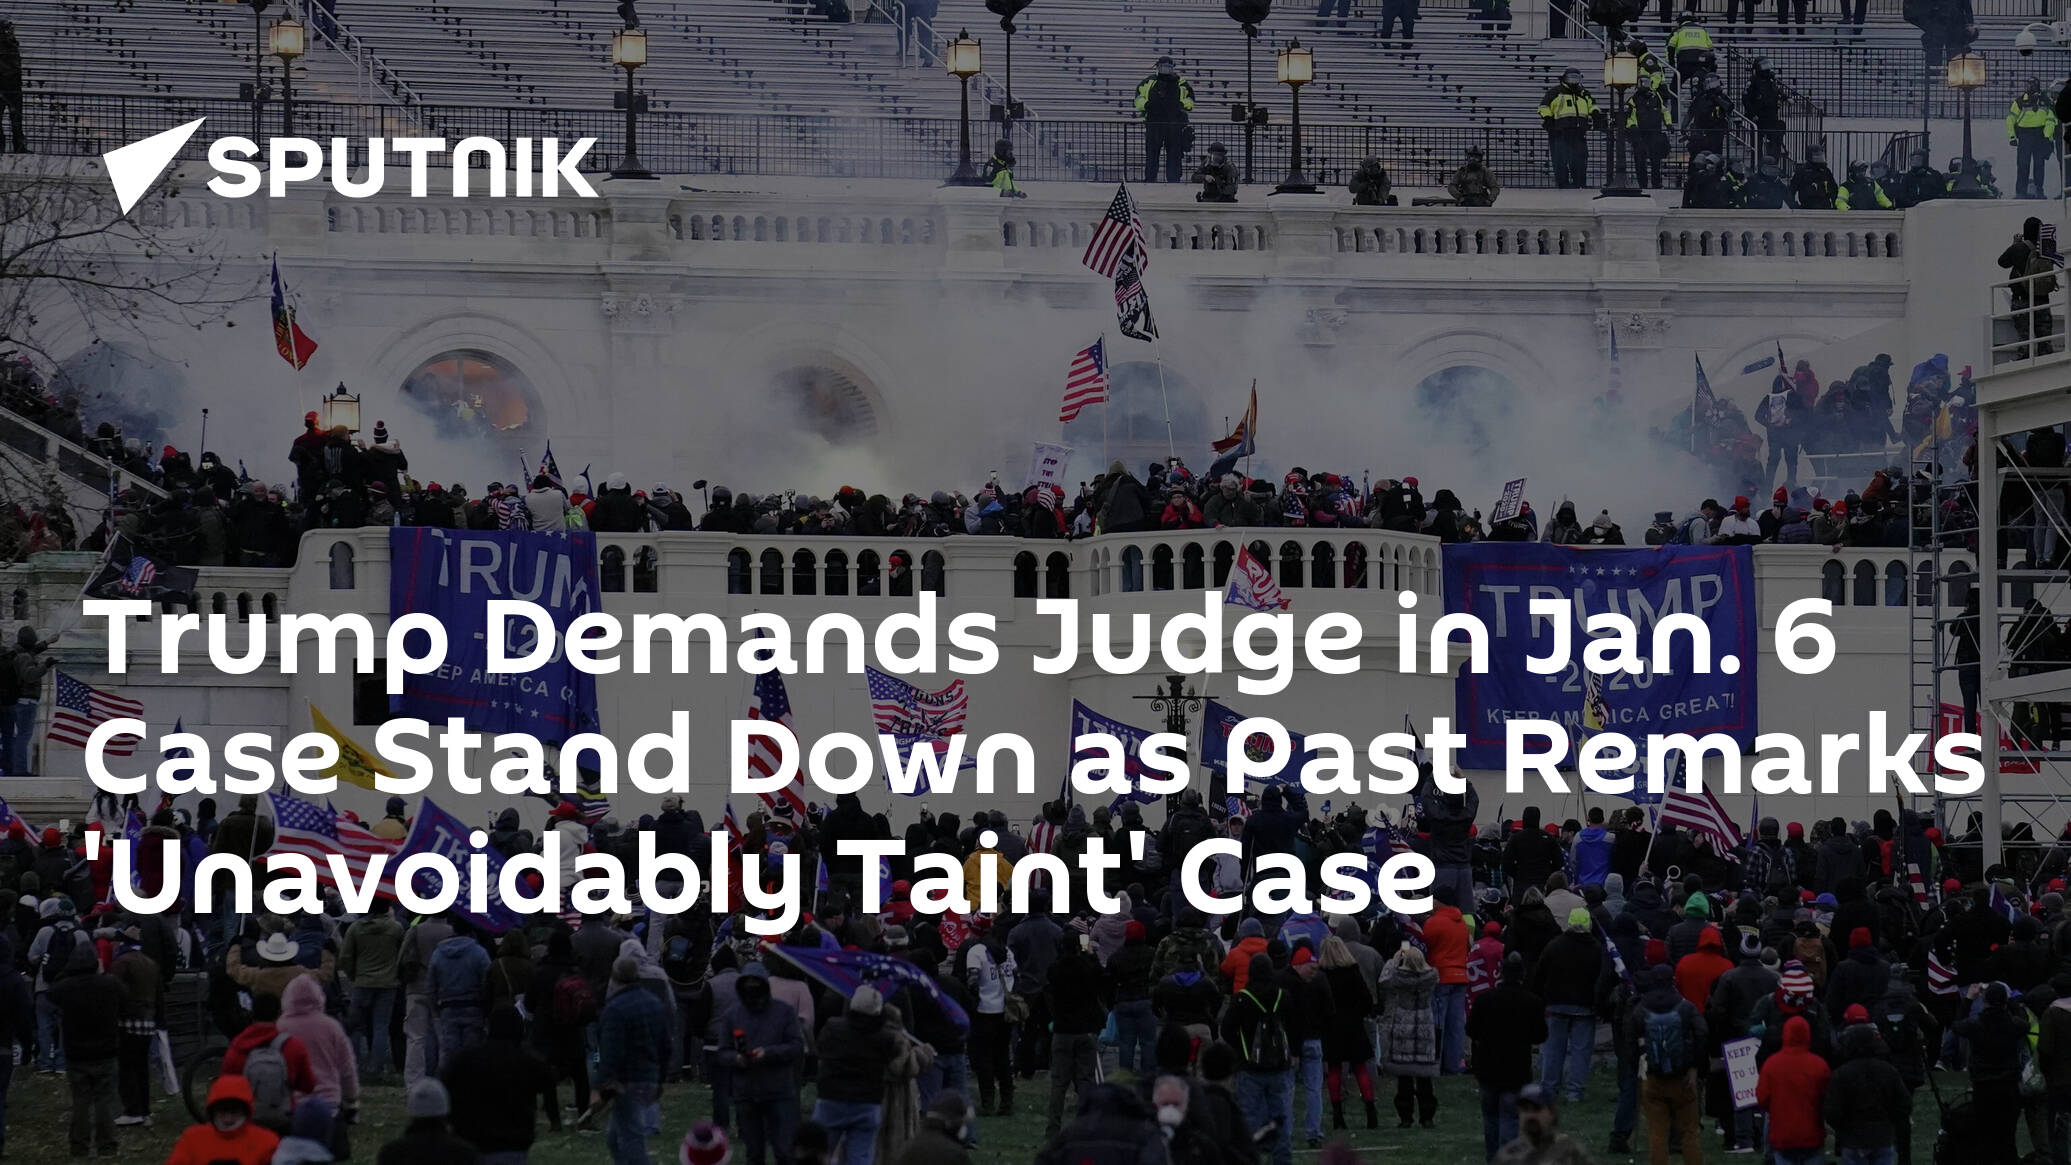 Trump Demands Judge in Jan. 6 Case Stand Down as Past Remarks 'Unavoidably Taint' Case